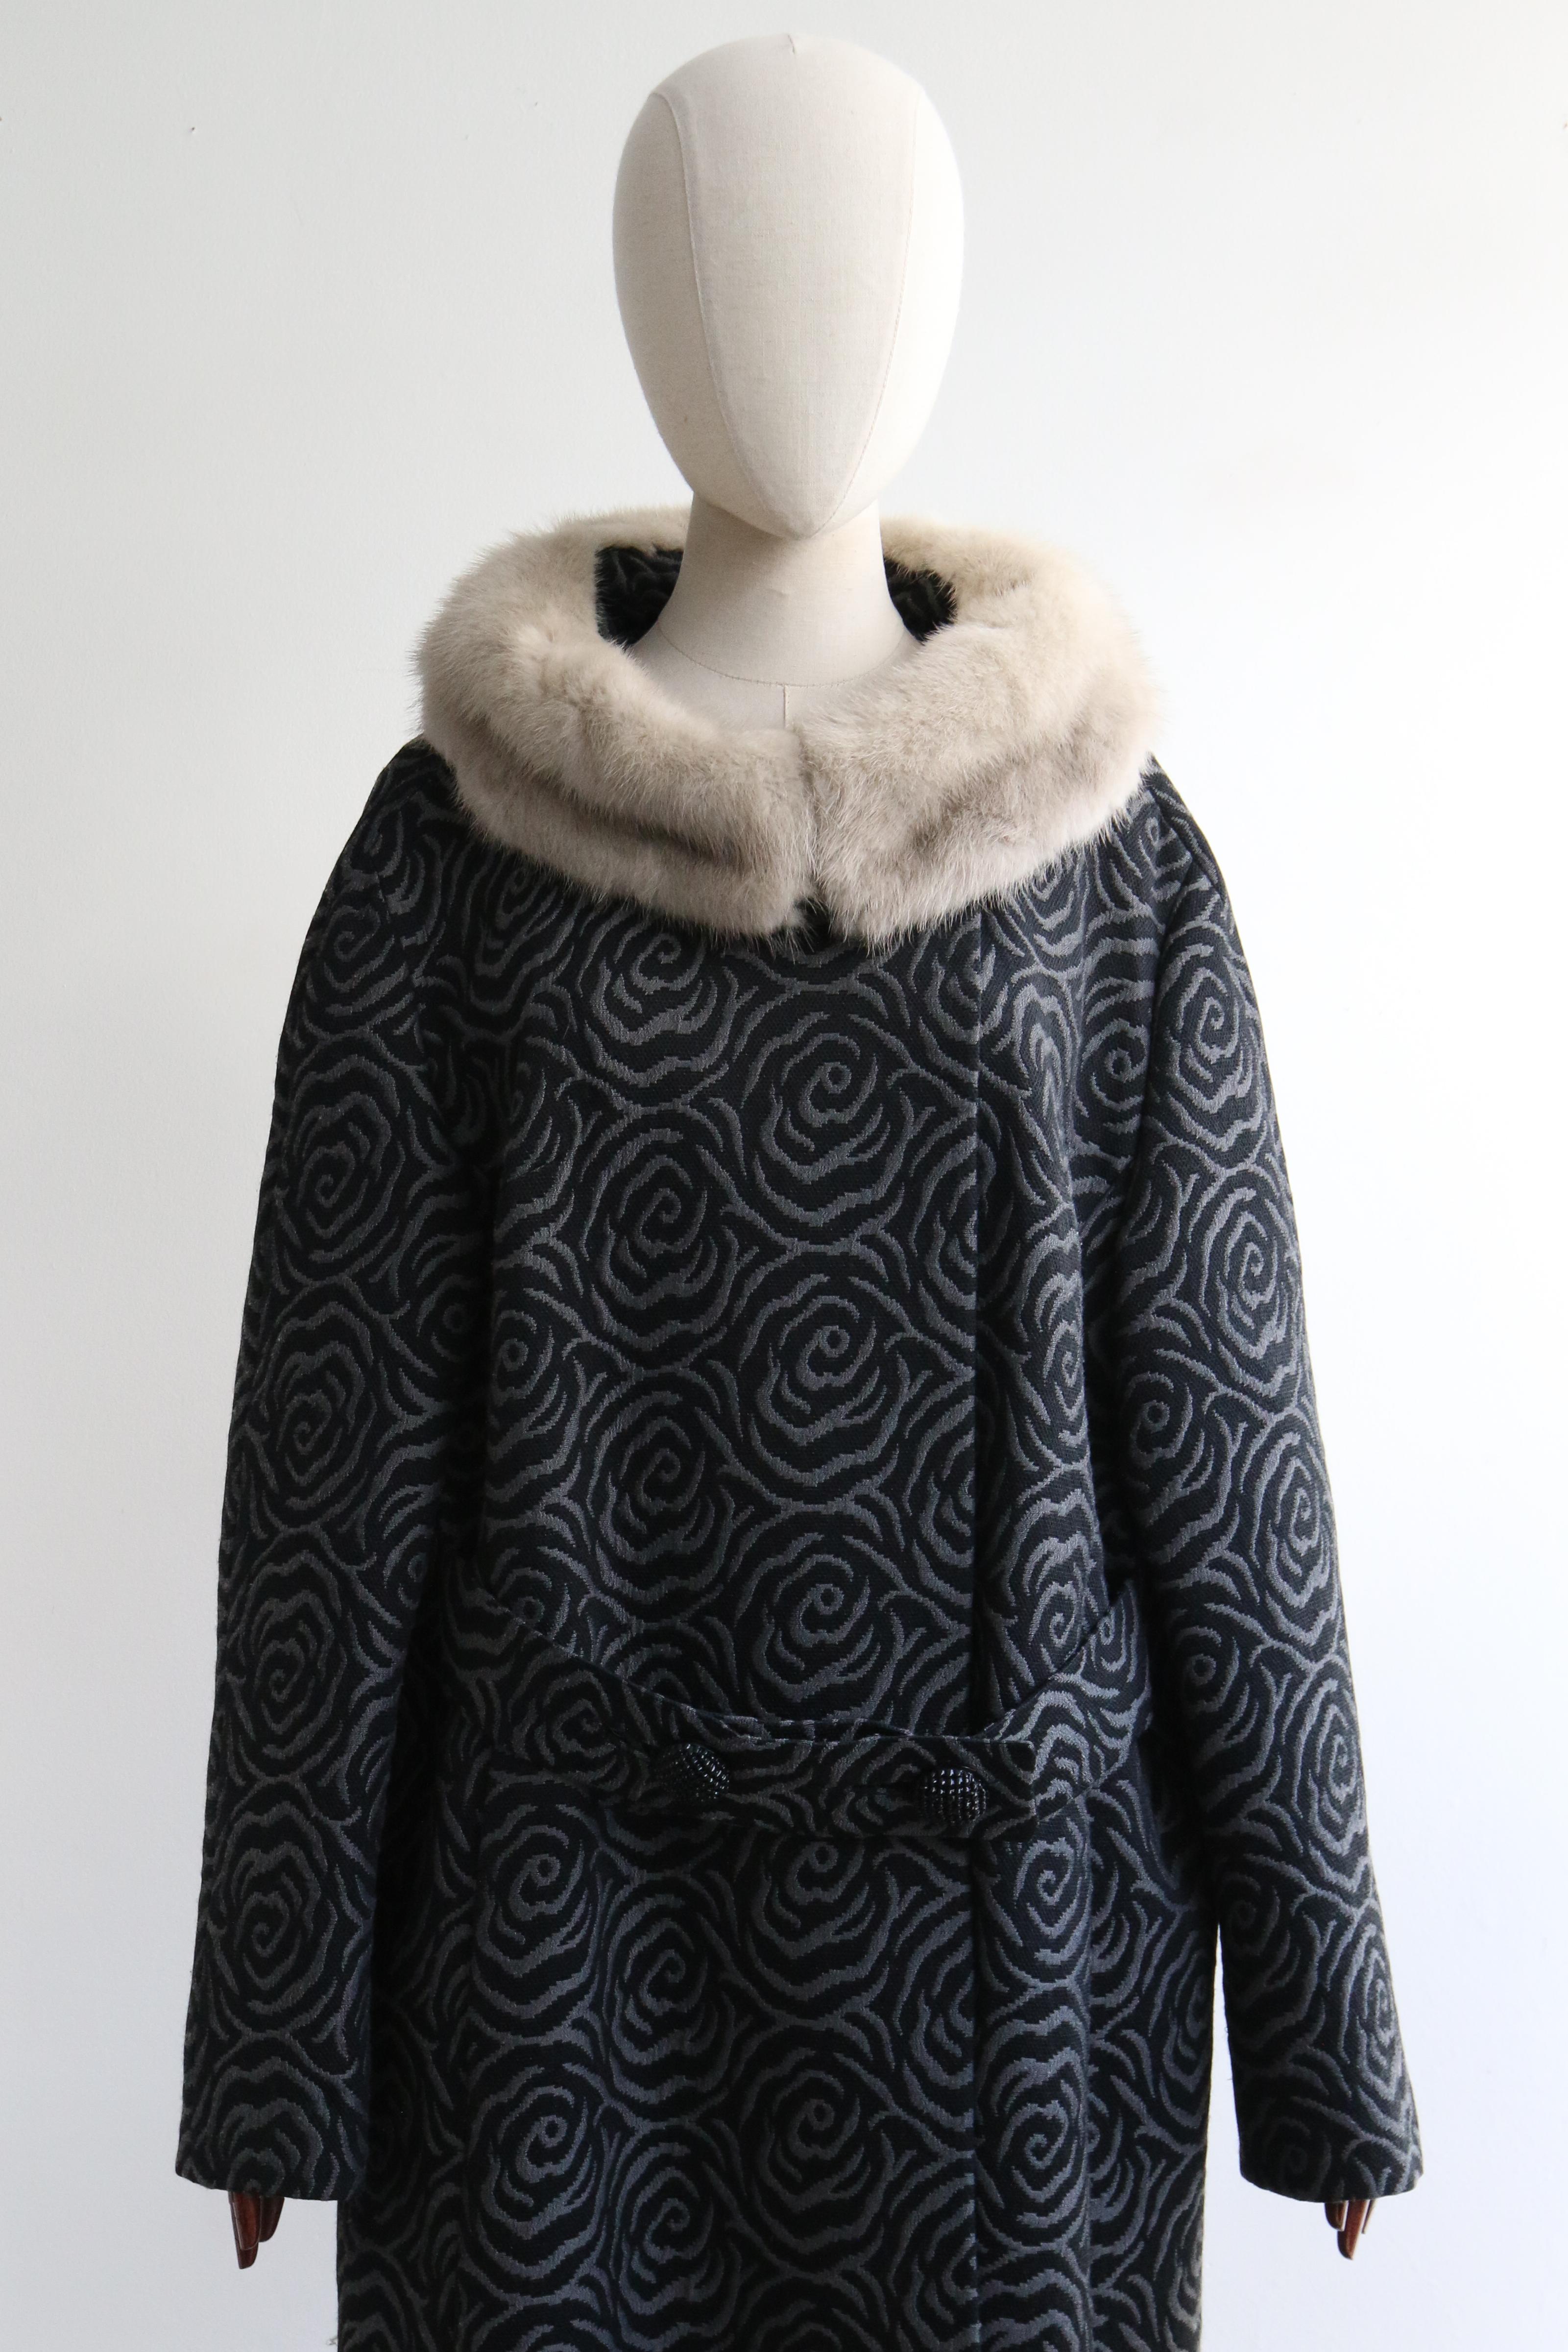 This wonderful 1950's coat, in a grey and black brocade pattern of swirling roses, accented by a silver mink collar is the perfect addition to your seasonal wardrobe.  

The neckline of the coat is framed by a wide grey toned mink full collar that